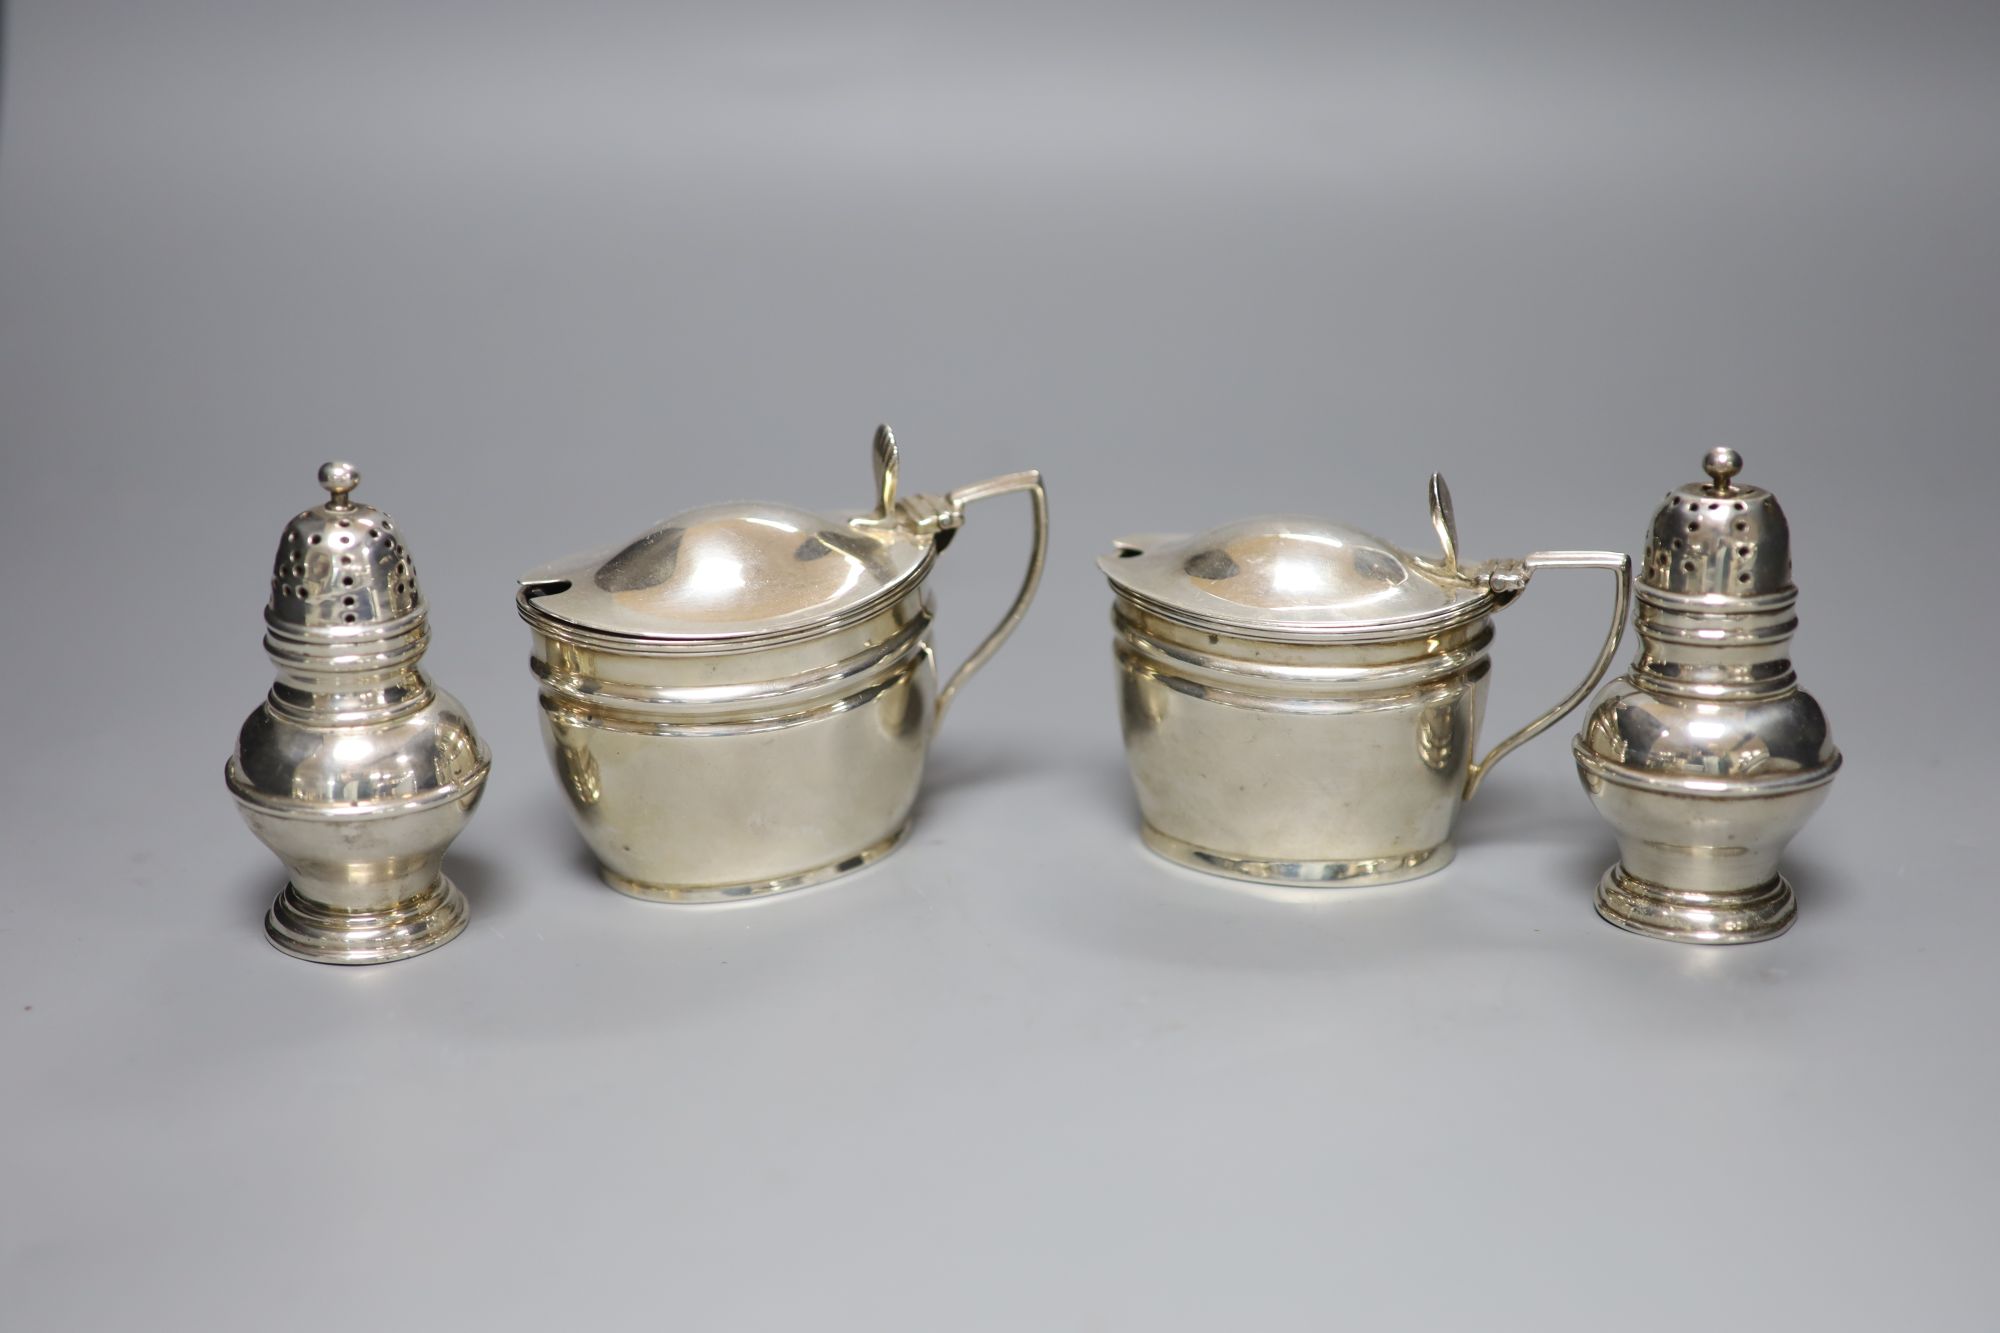 A pair of Victorian silver mustards, London, 1892/4 and a pair of Victorian silver pepperettes, London, 1884.